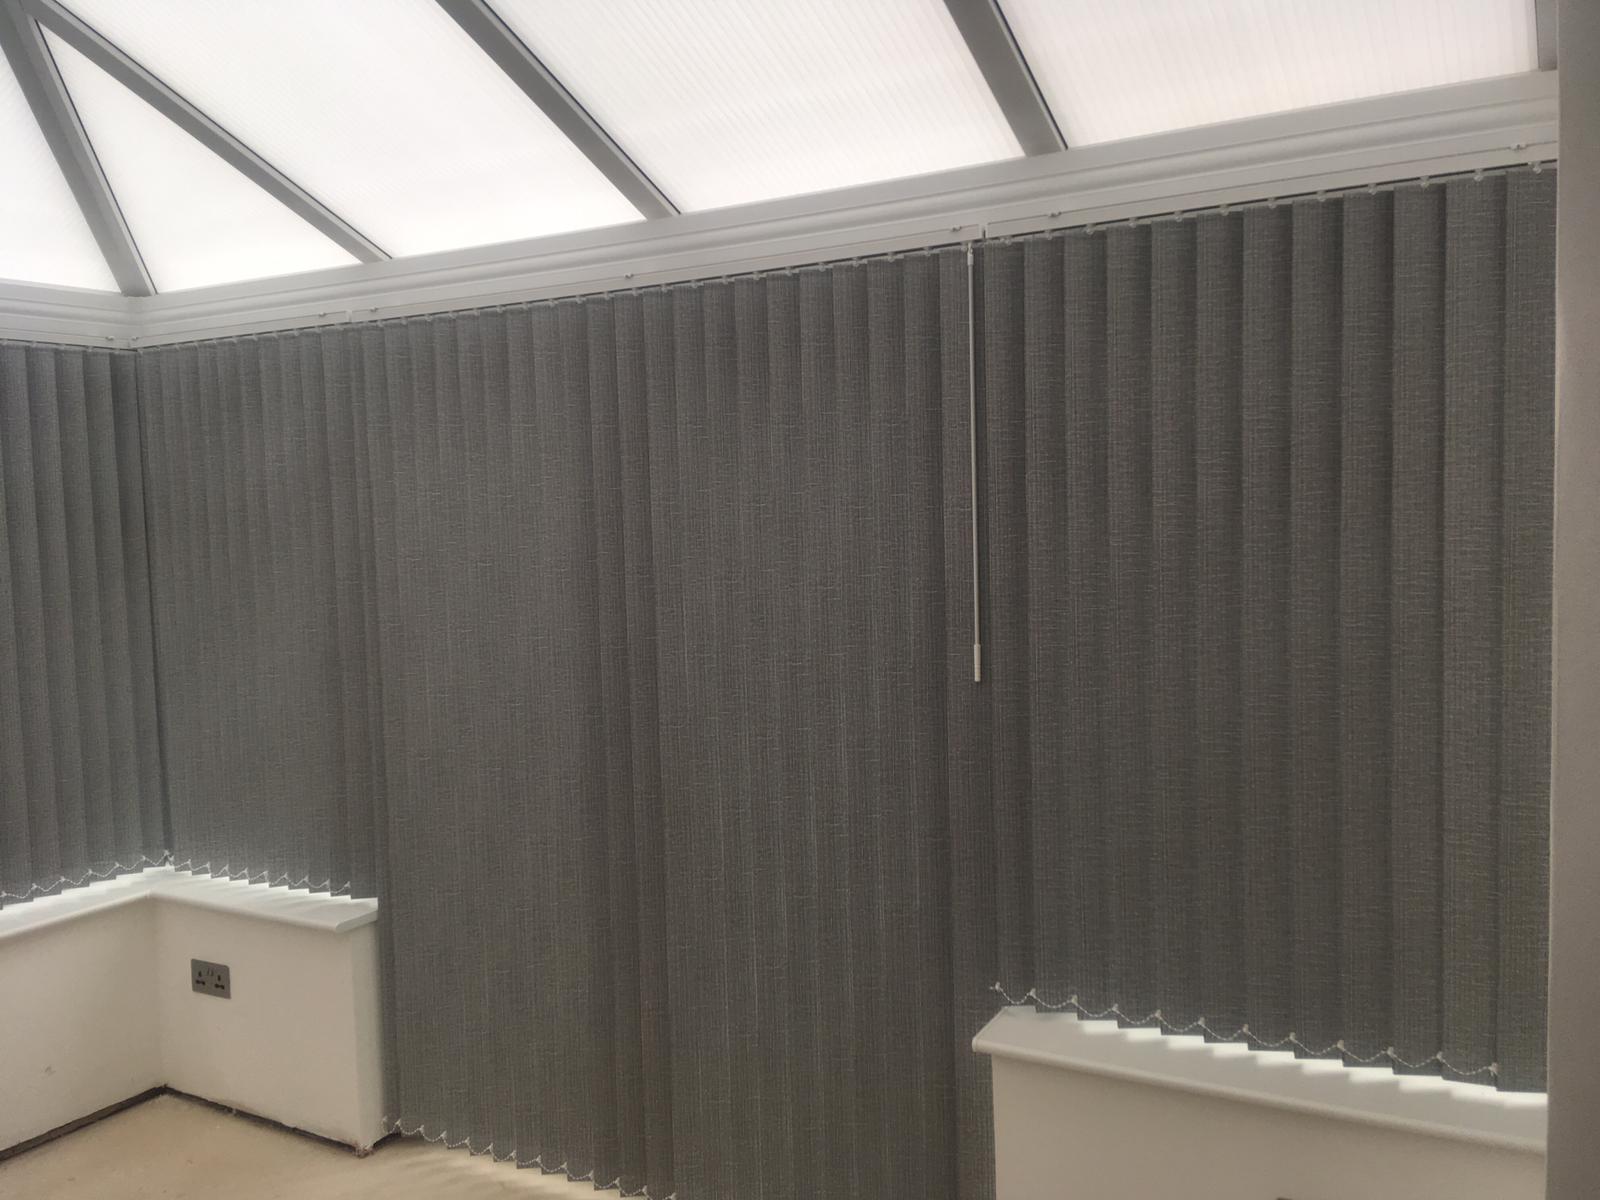 Suppliers of Curved Rail Vertical Blinds For Bay Windows UK